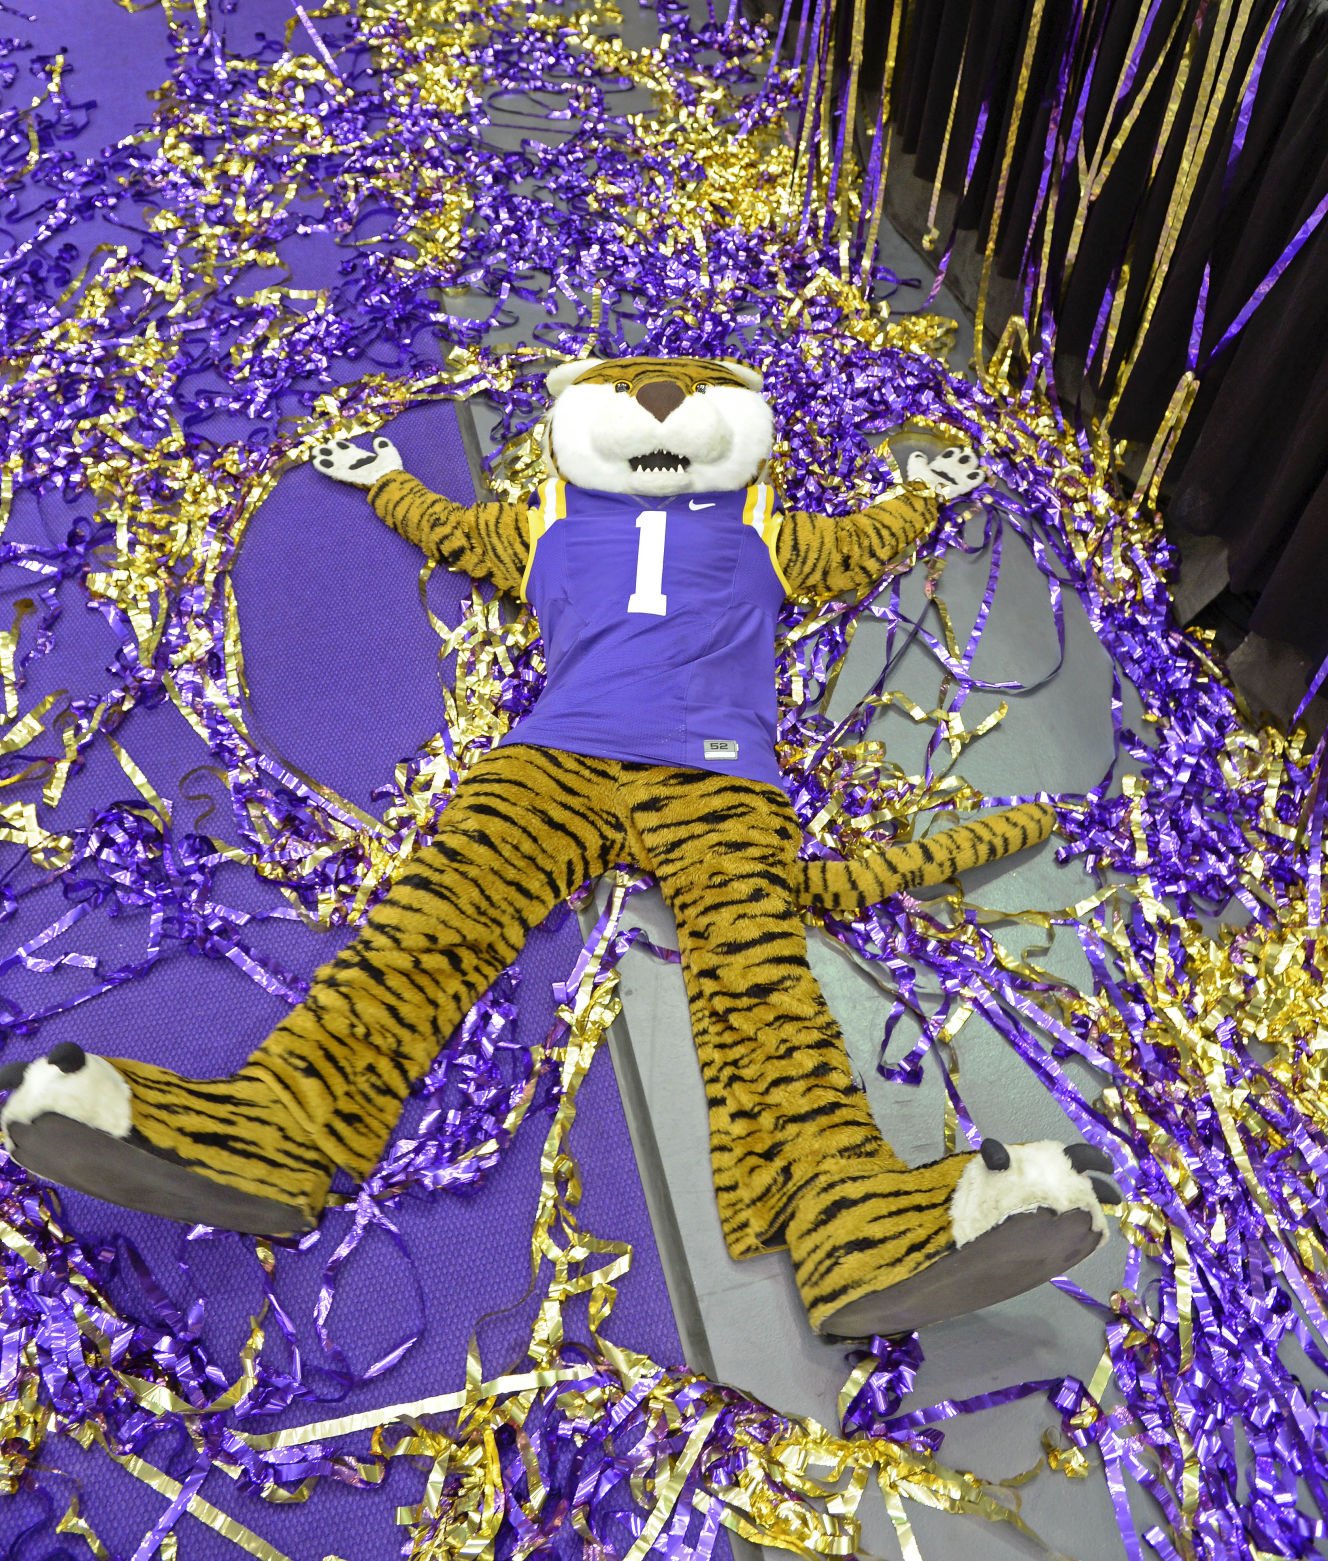 LSU Colors: Purple and Gold a Proud Tradition Since 1893